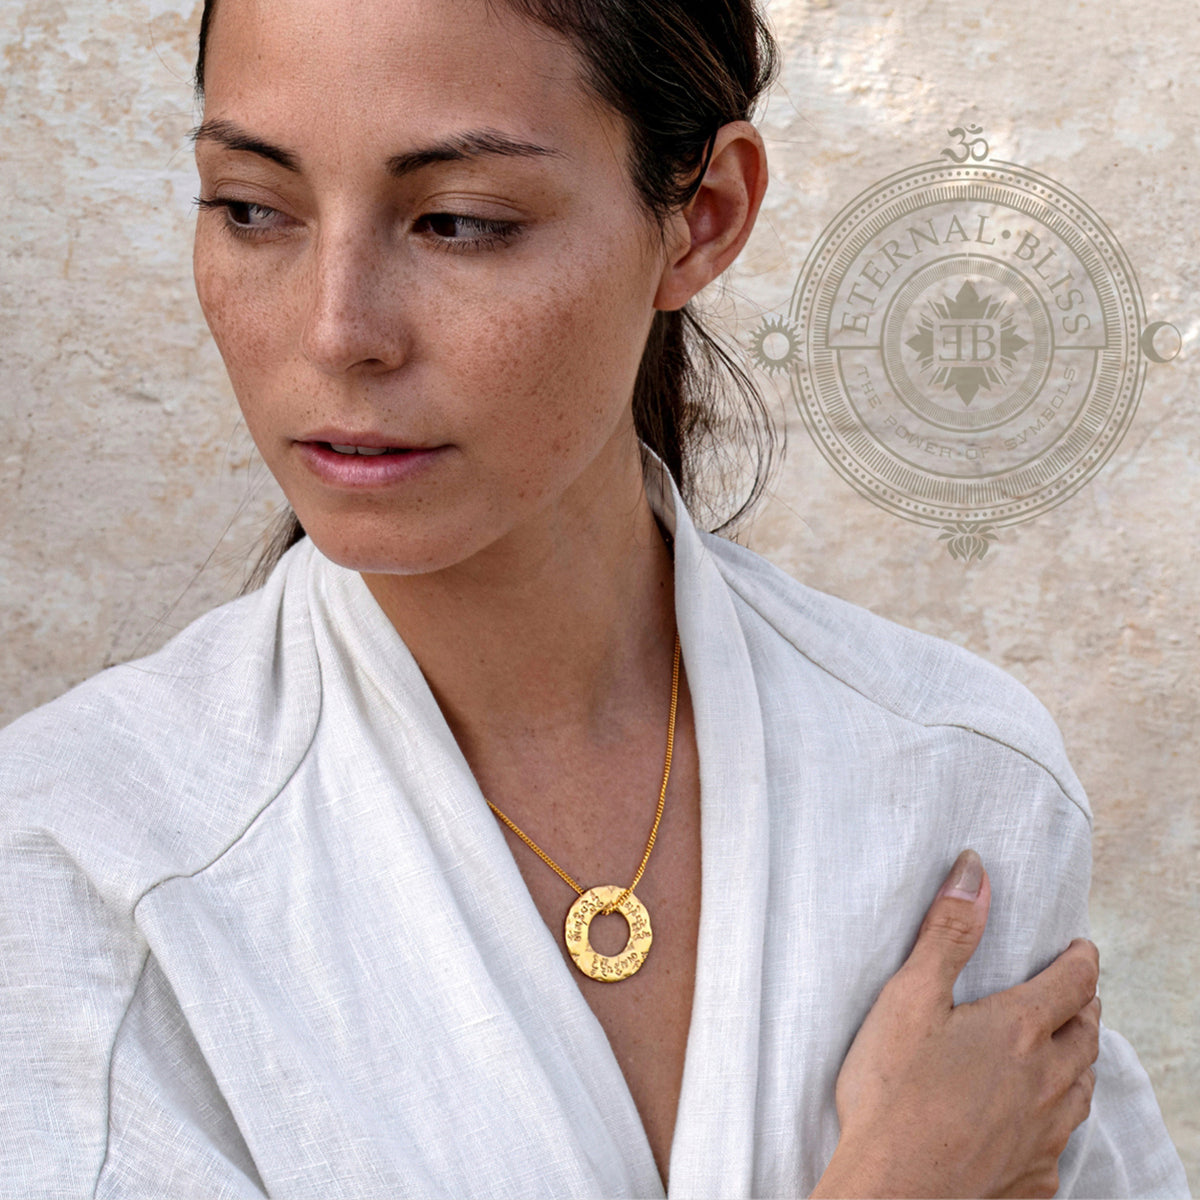 Spiritual Jewelry from ETERNAL BLISS: The Om-Mani-Padme-Hum Mantra Jewelry Collection